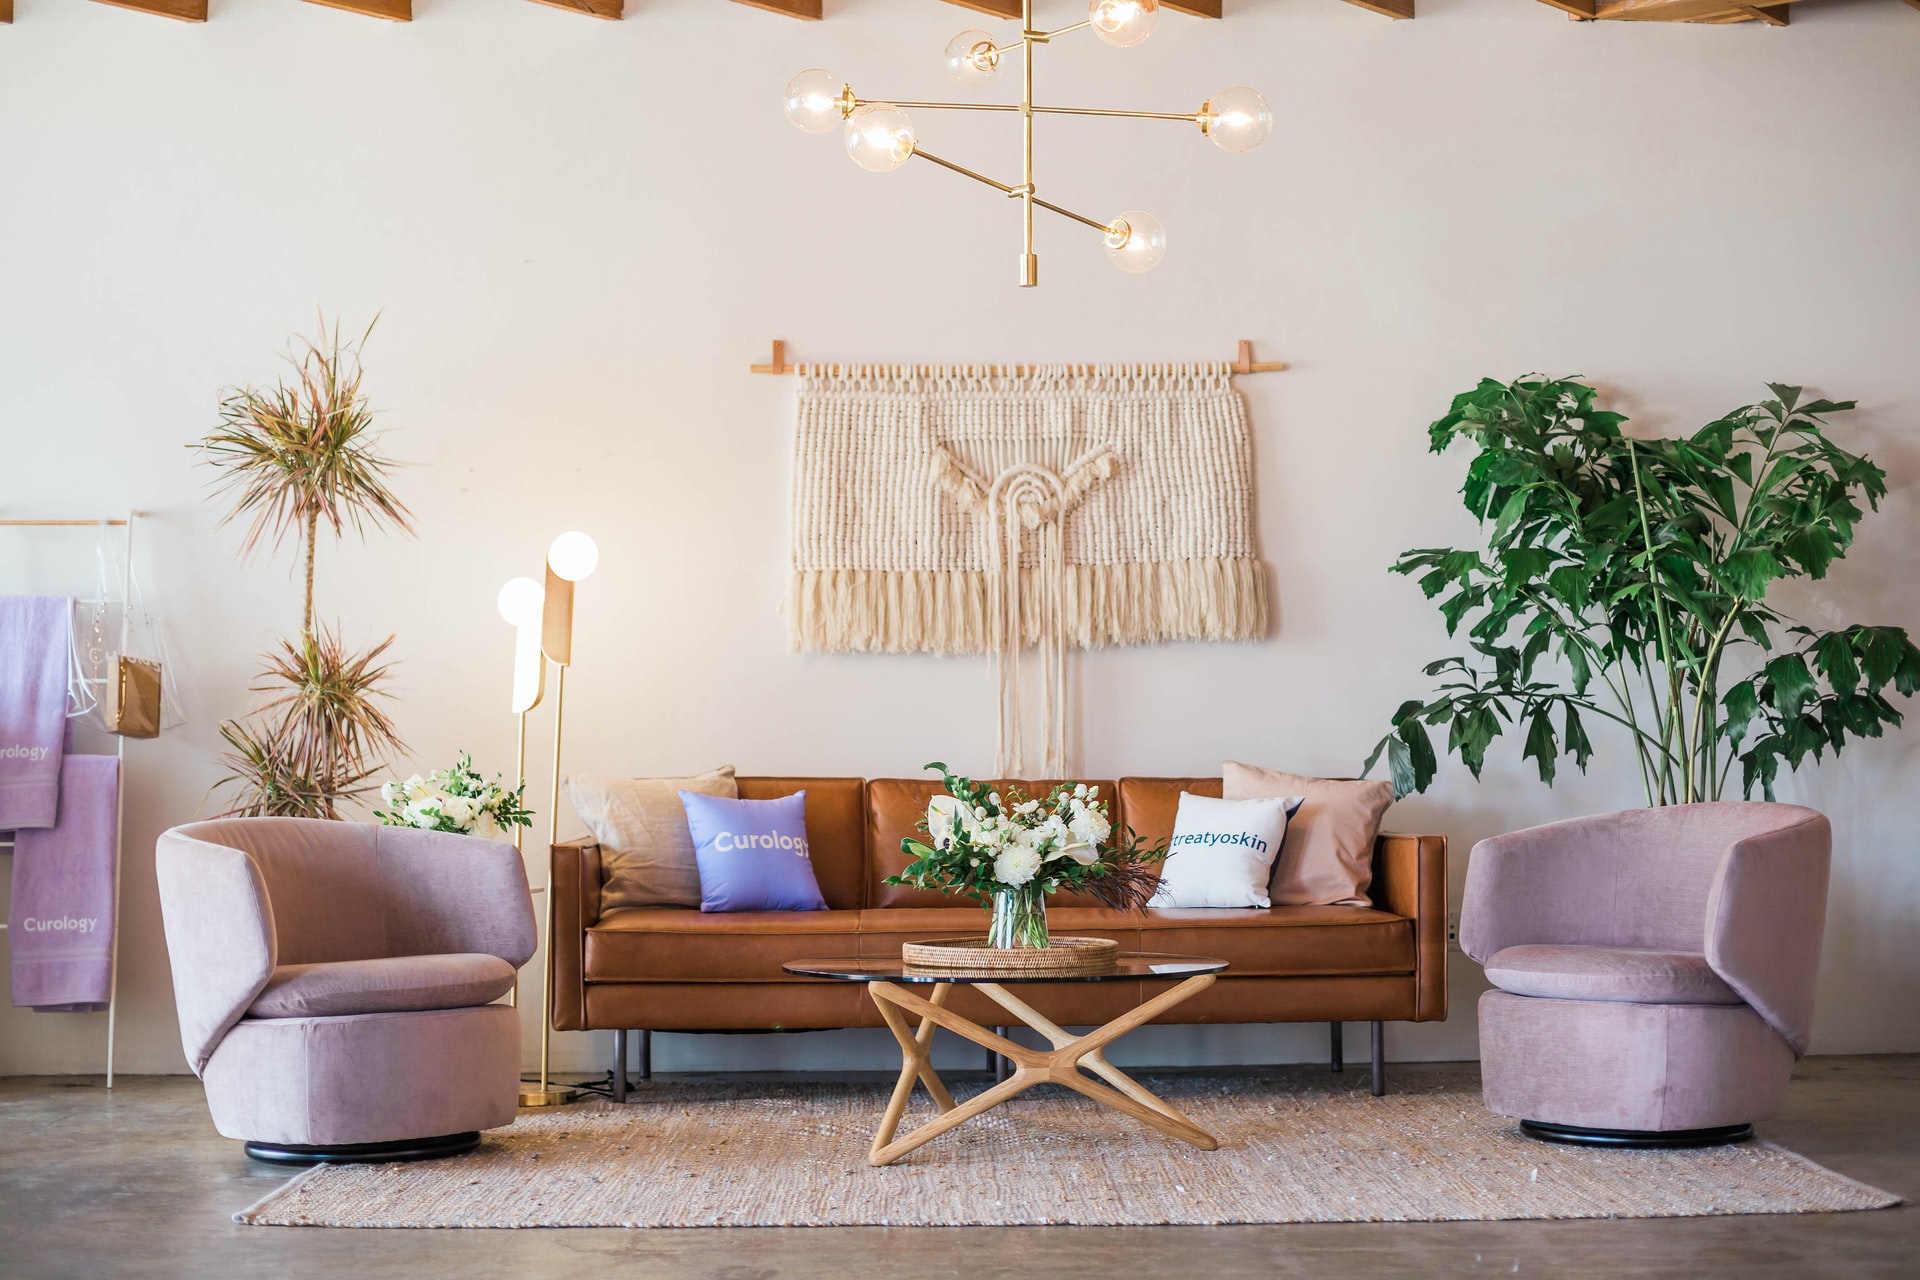 How to decorate your apartment in boho style?